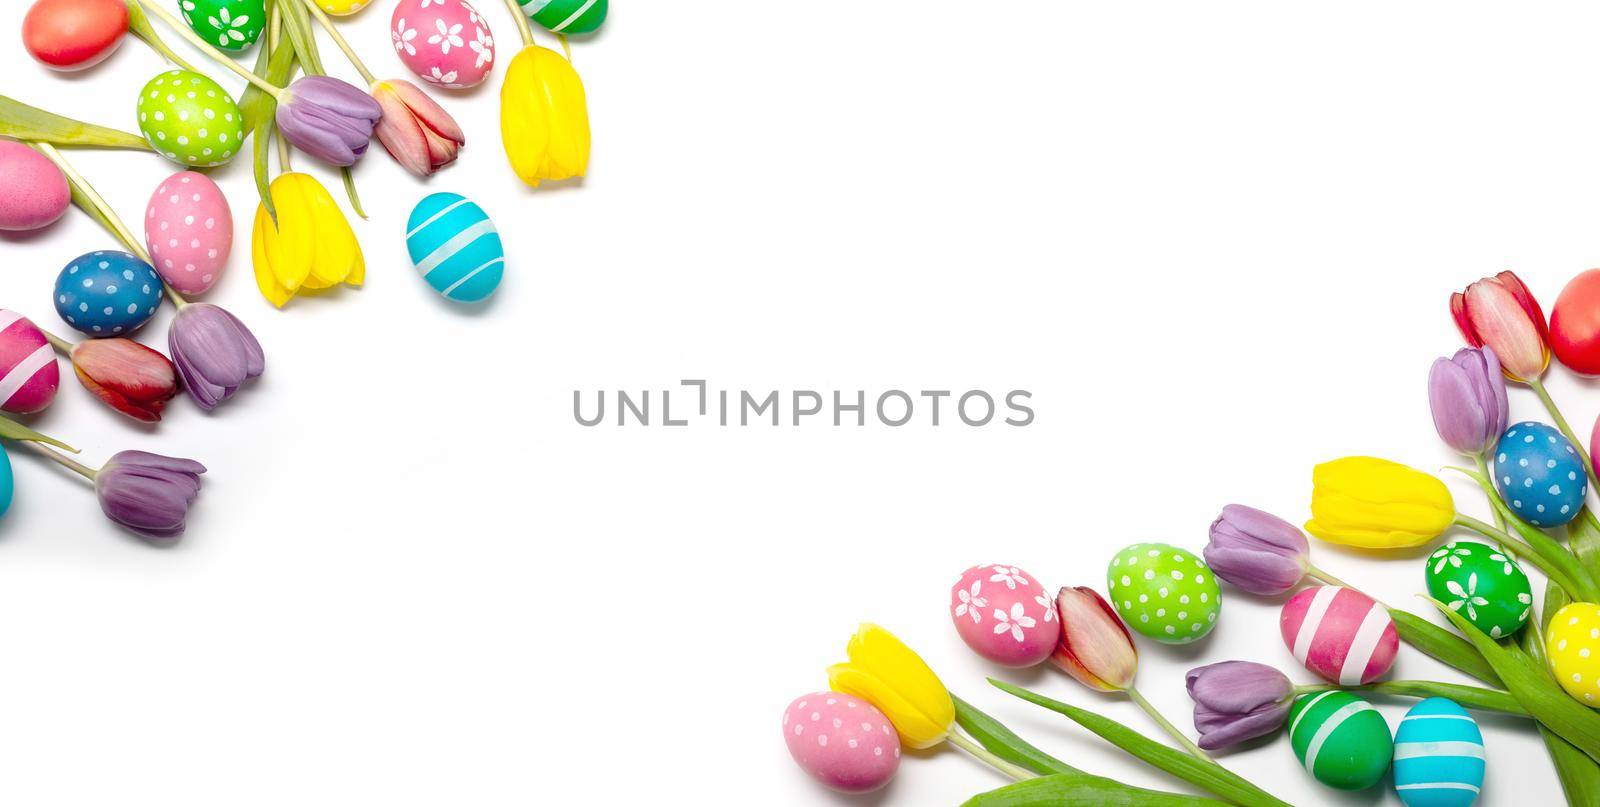 Easter tulips and eggs isolated on white background, border frame corner composition with copy space for text